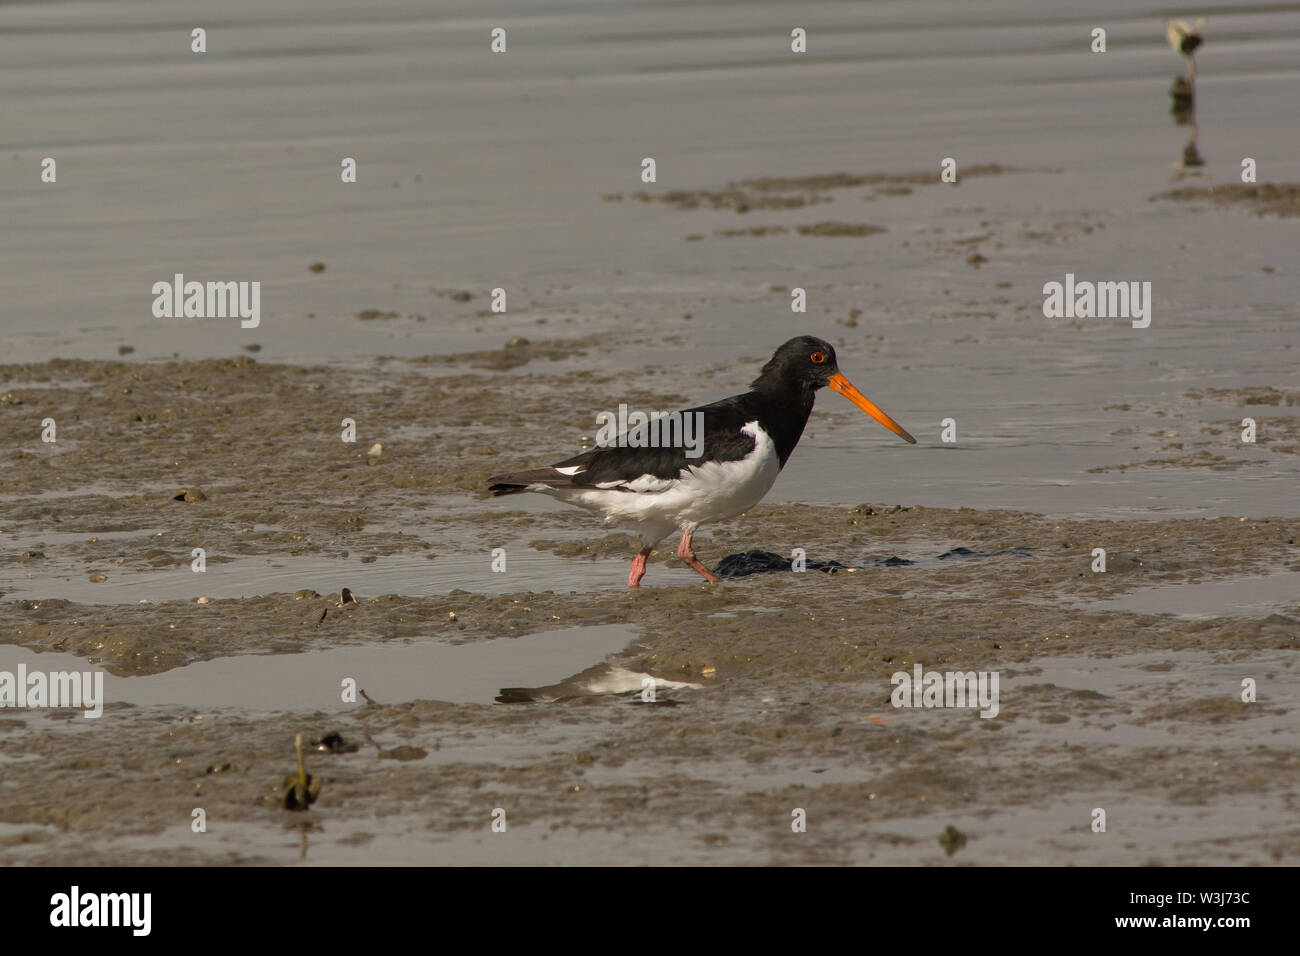 South Island Pied Oystercatcher (Haematopus finschi) wading in mud Stock Photo